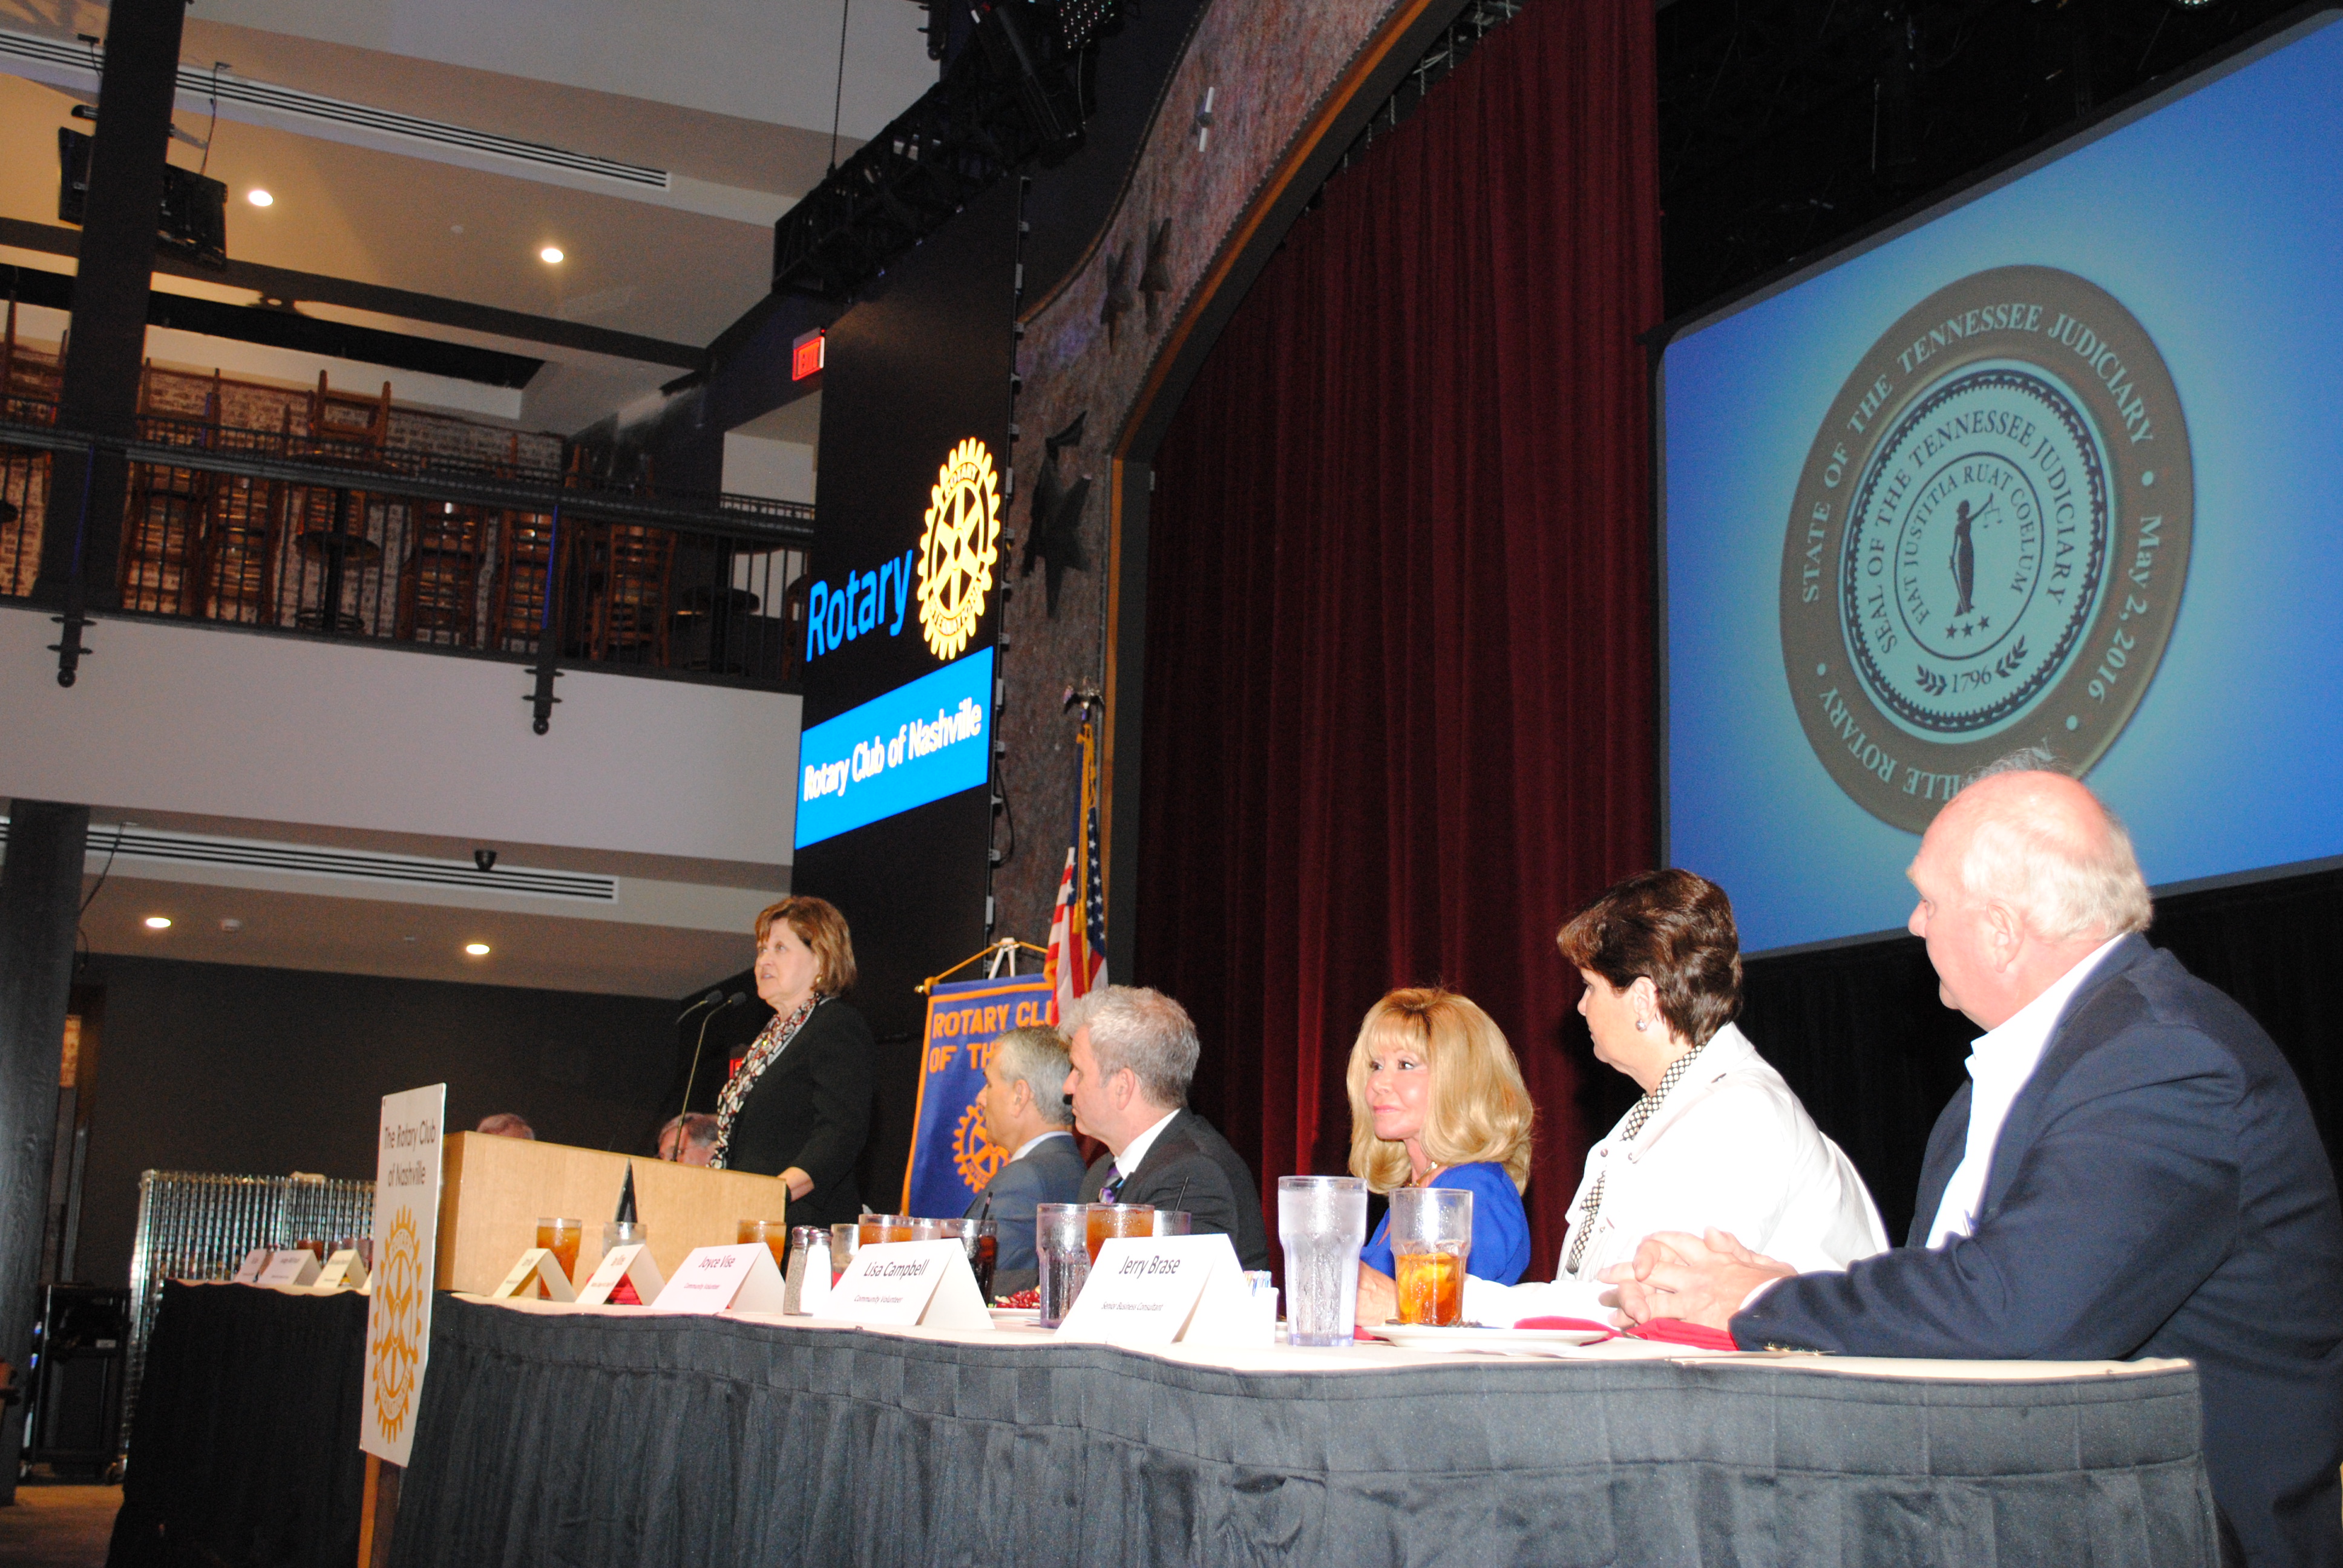 Chief Justice Lee speaks to the Rotary Club of Nashville on May 2, 2016.